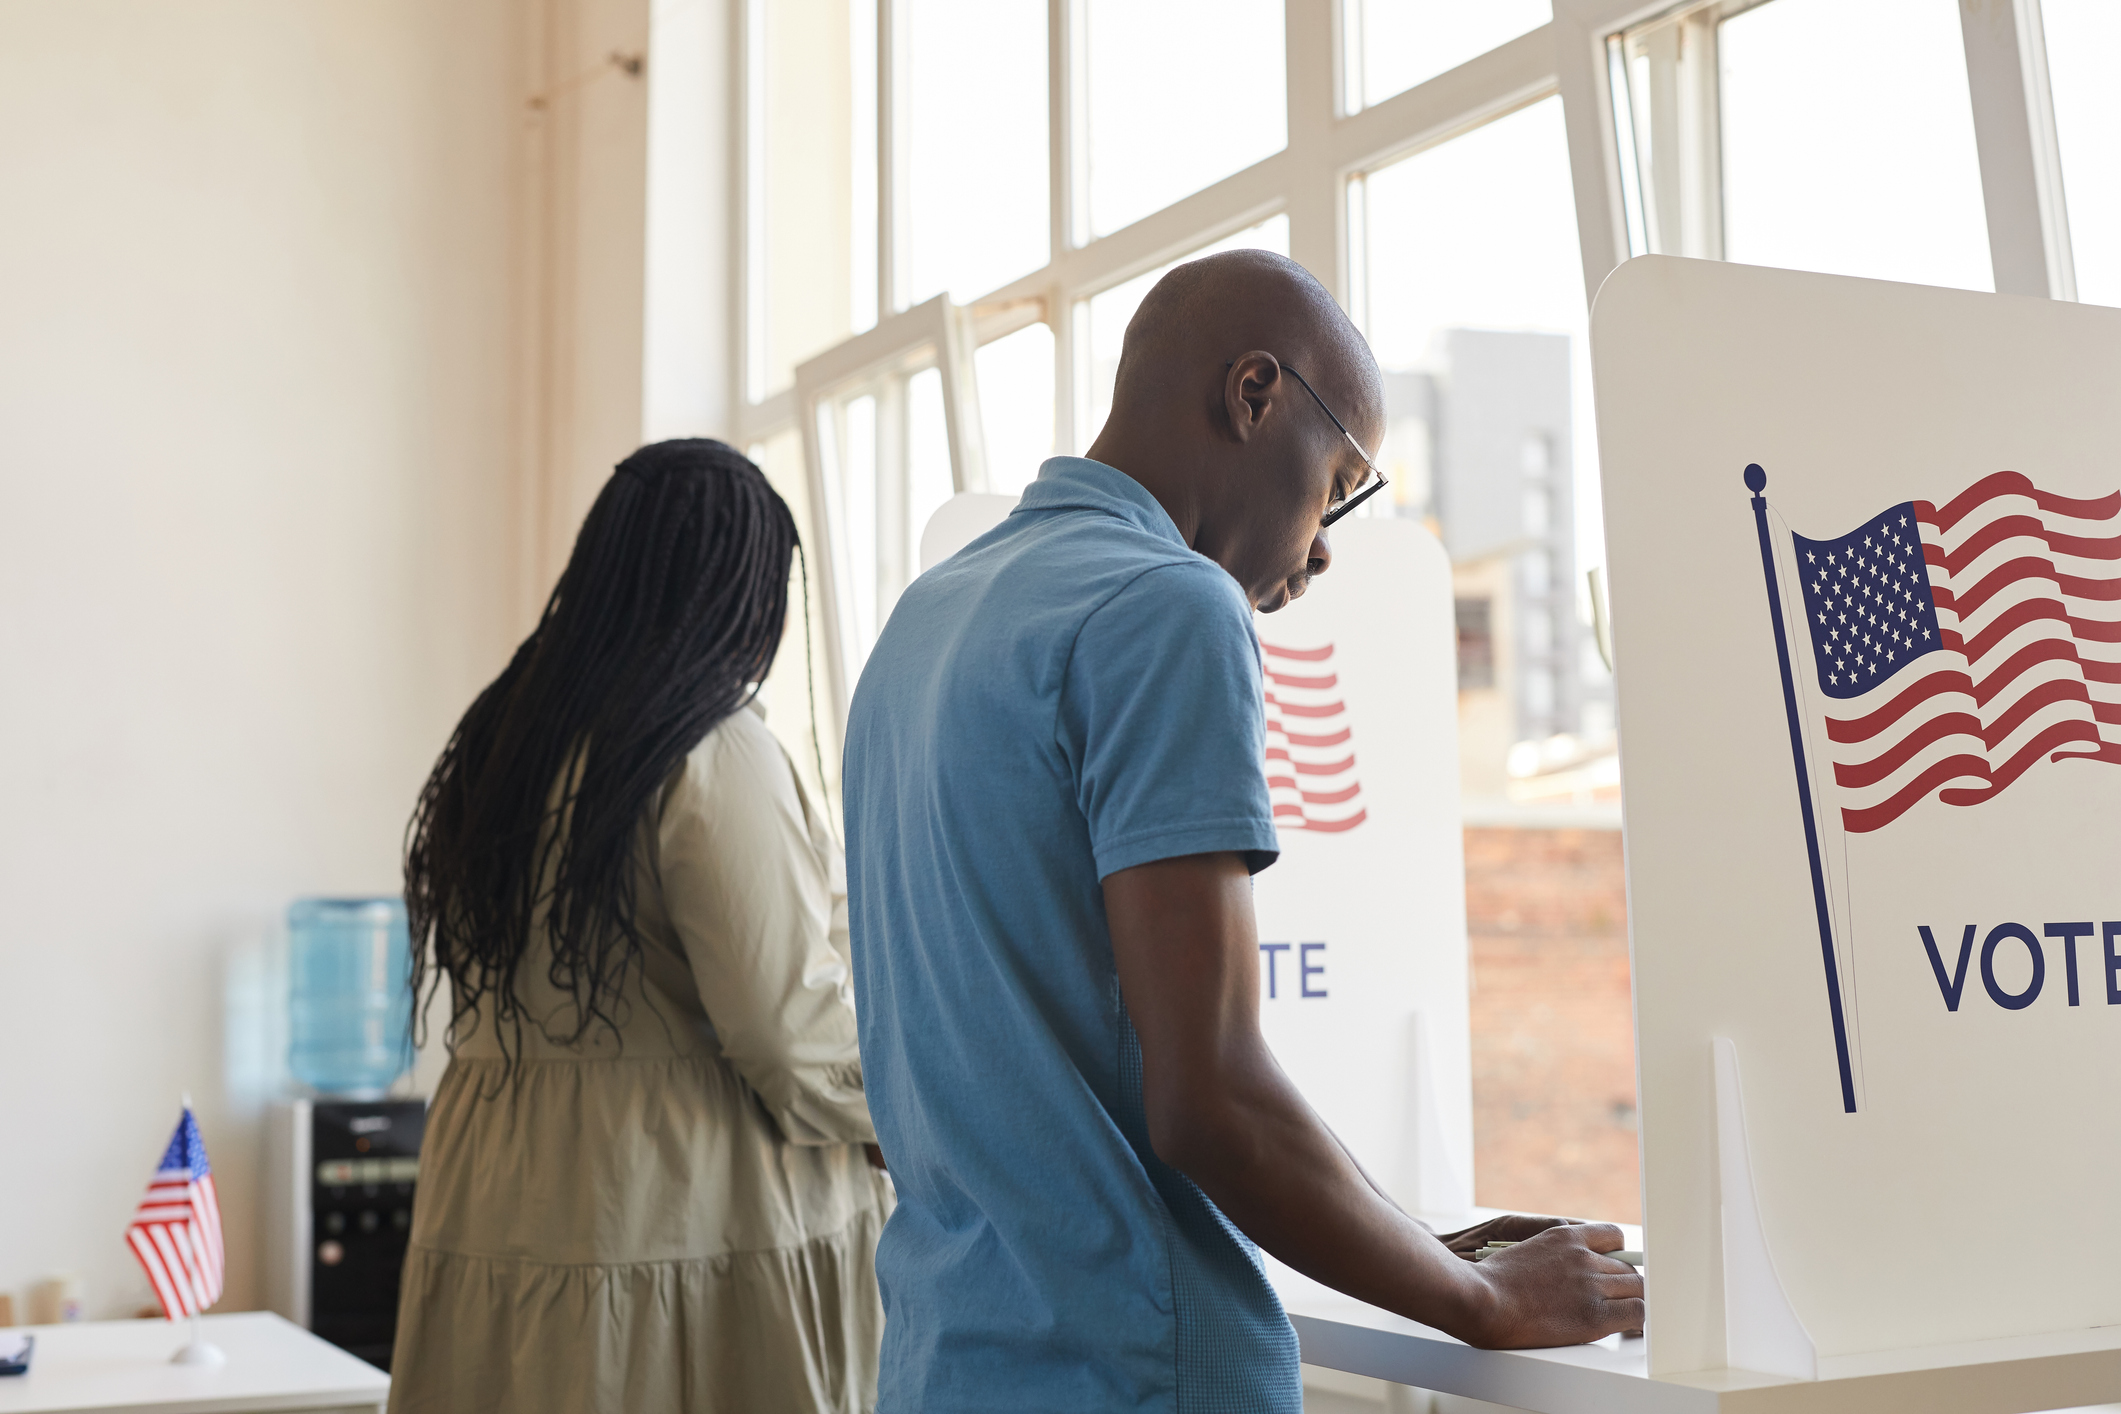 Two African American people in separate voting booths